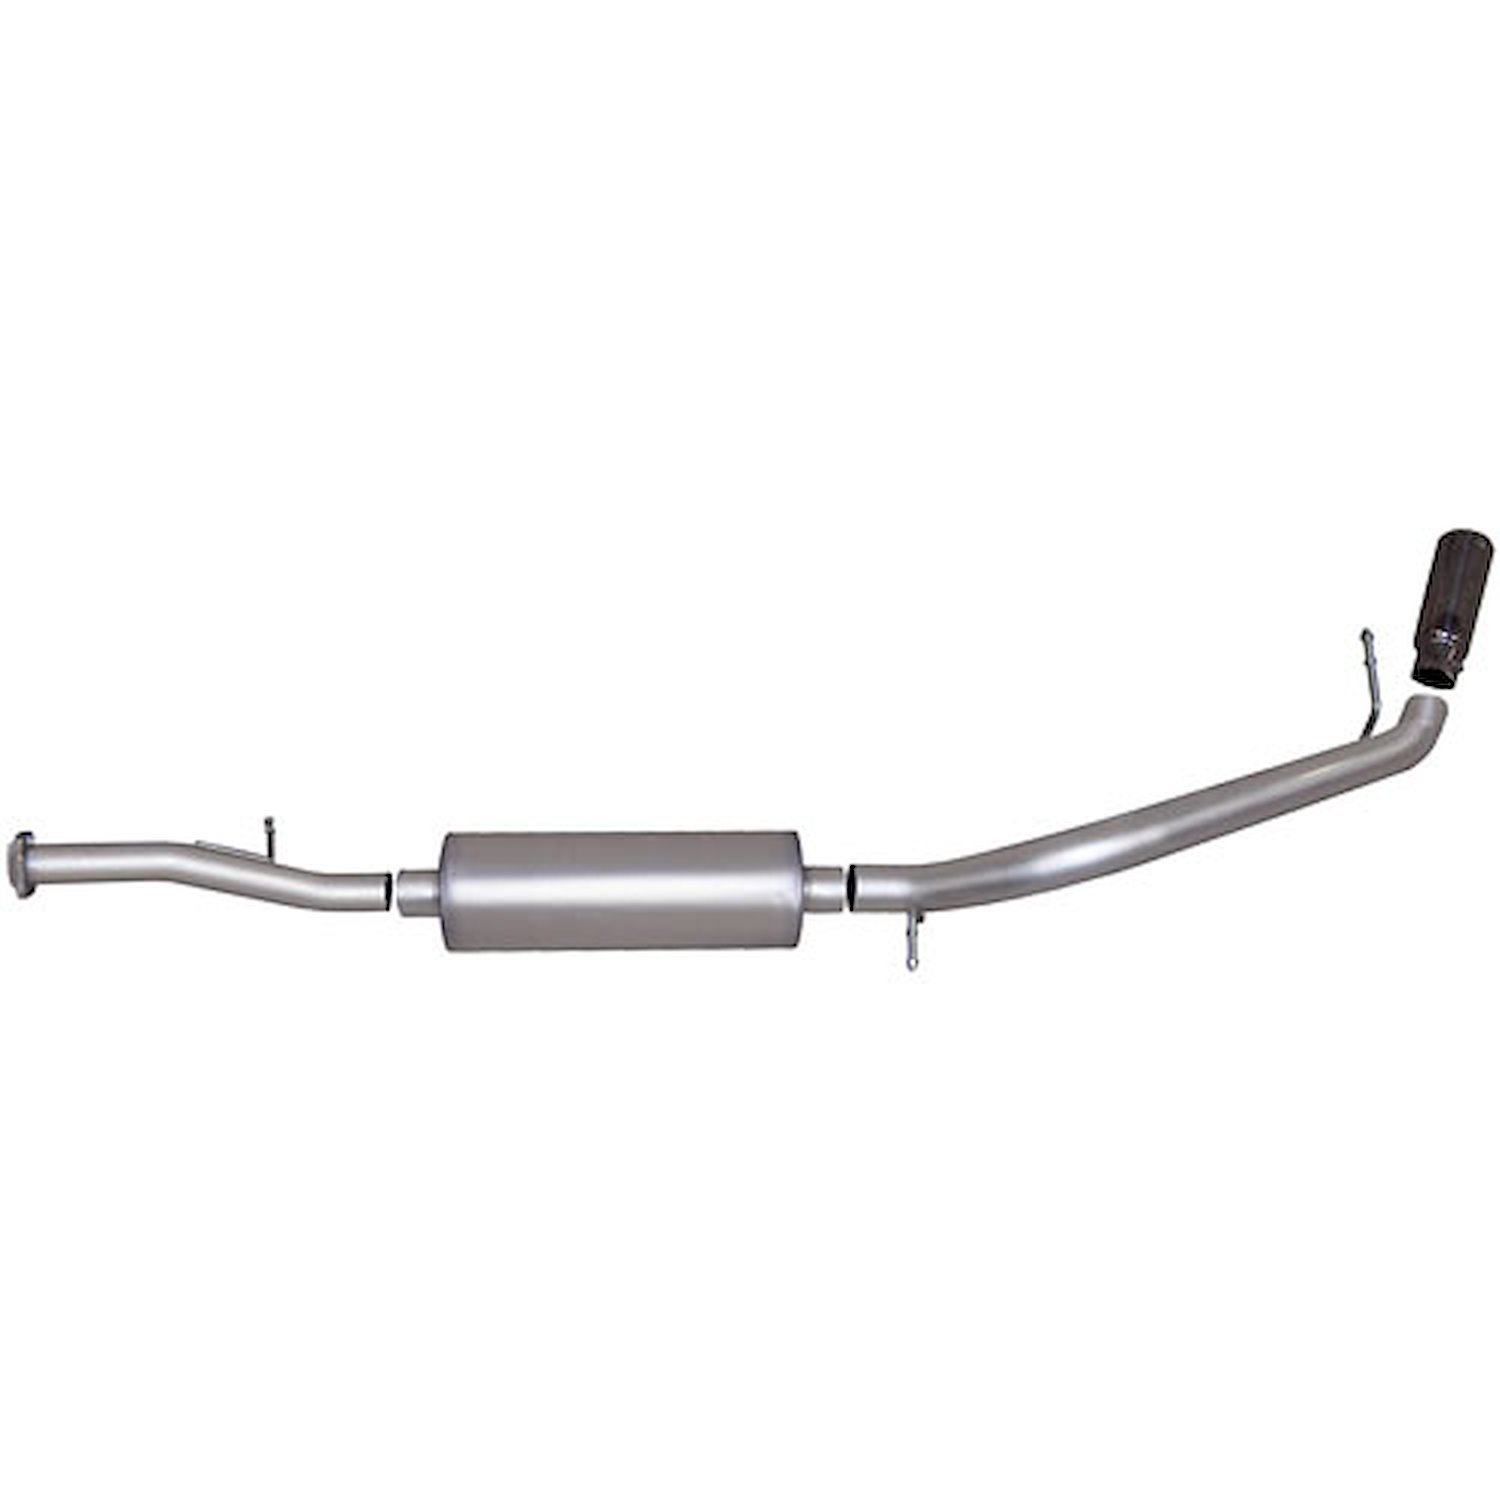 Swept-Side Stainless Steel Cat-Back Exhaust 2007-14 Chevy Suburban/GMC Yukon XL 5.3L-6.0L